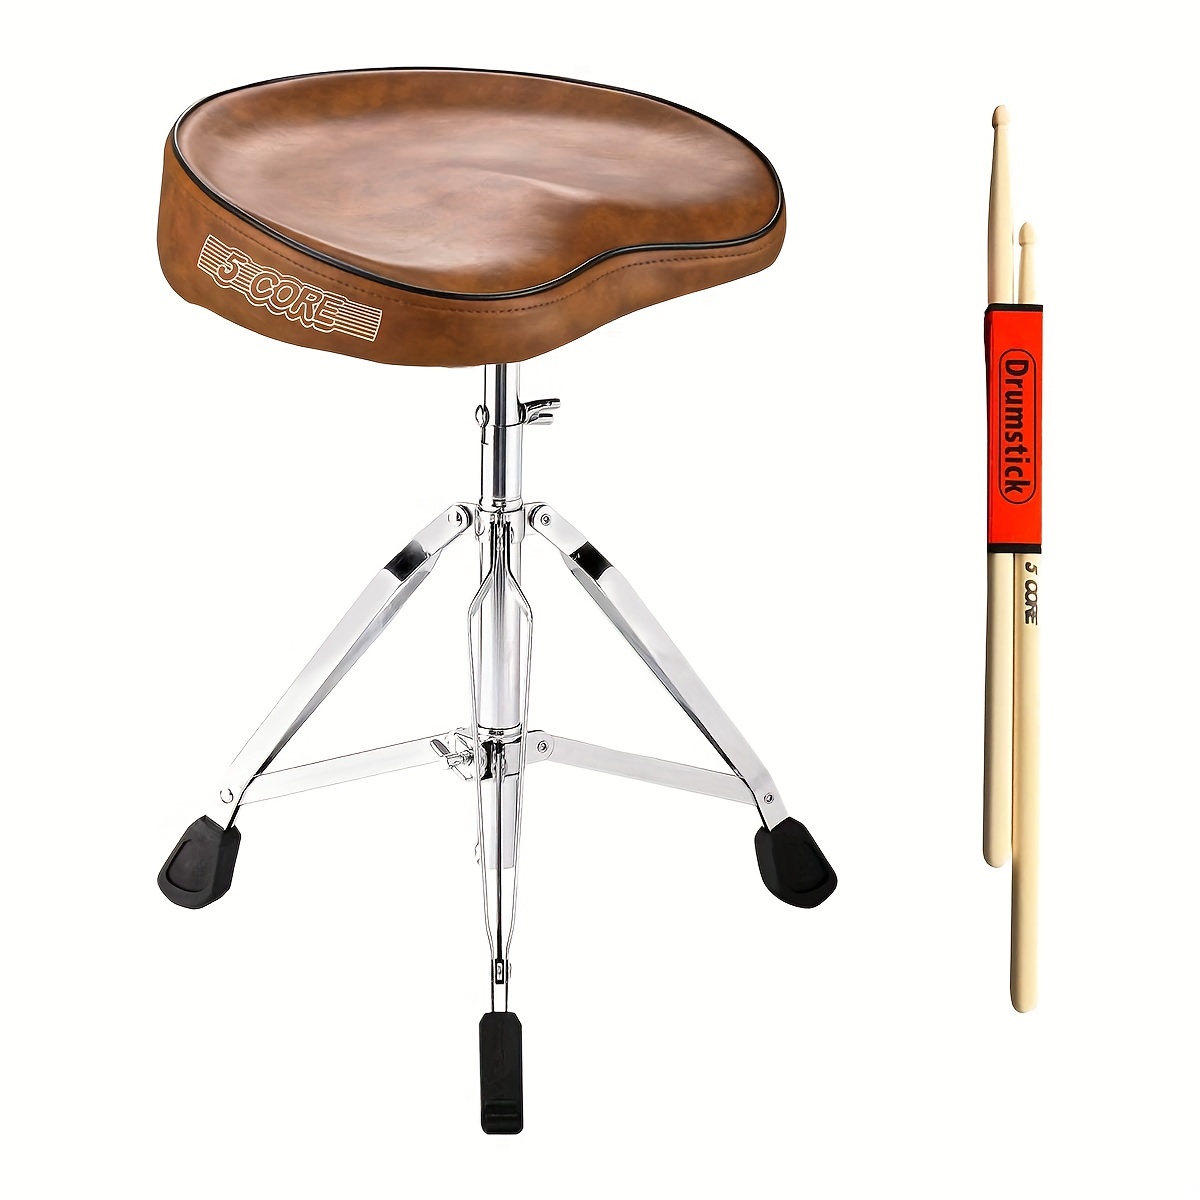 

Drum Throne Comfortable Padded Stool Height Adjustable Music Dj Chair Heavy Duty Piano Guitar Cello Seat For Drummer Kids And Adults - Ds Ch Br Sdl